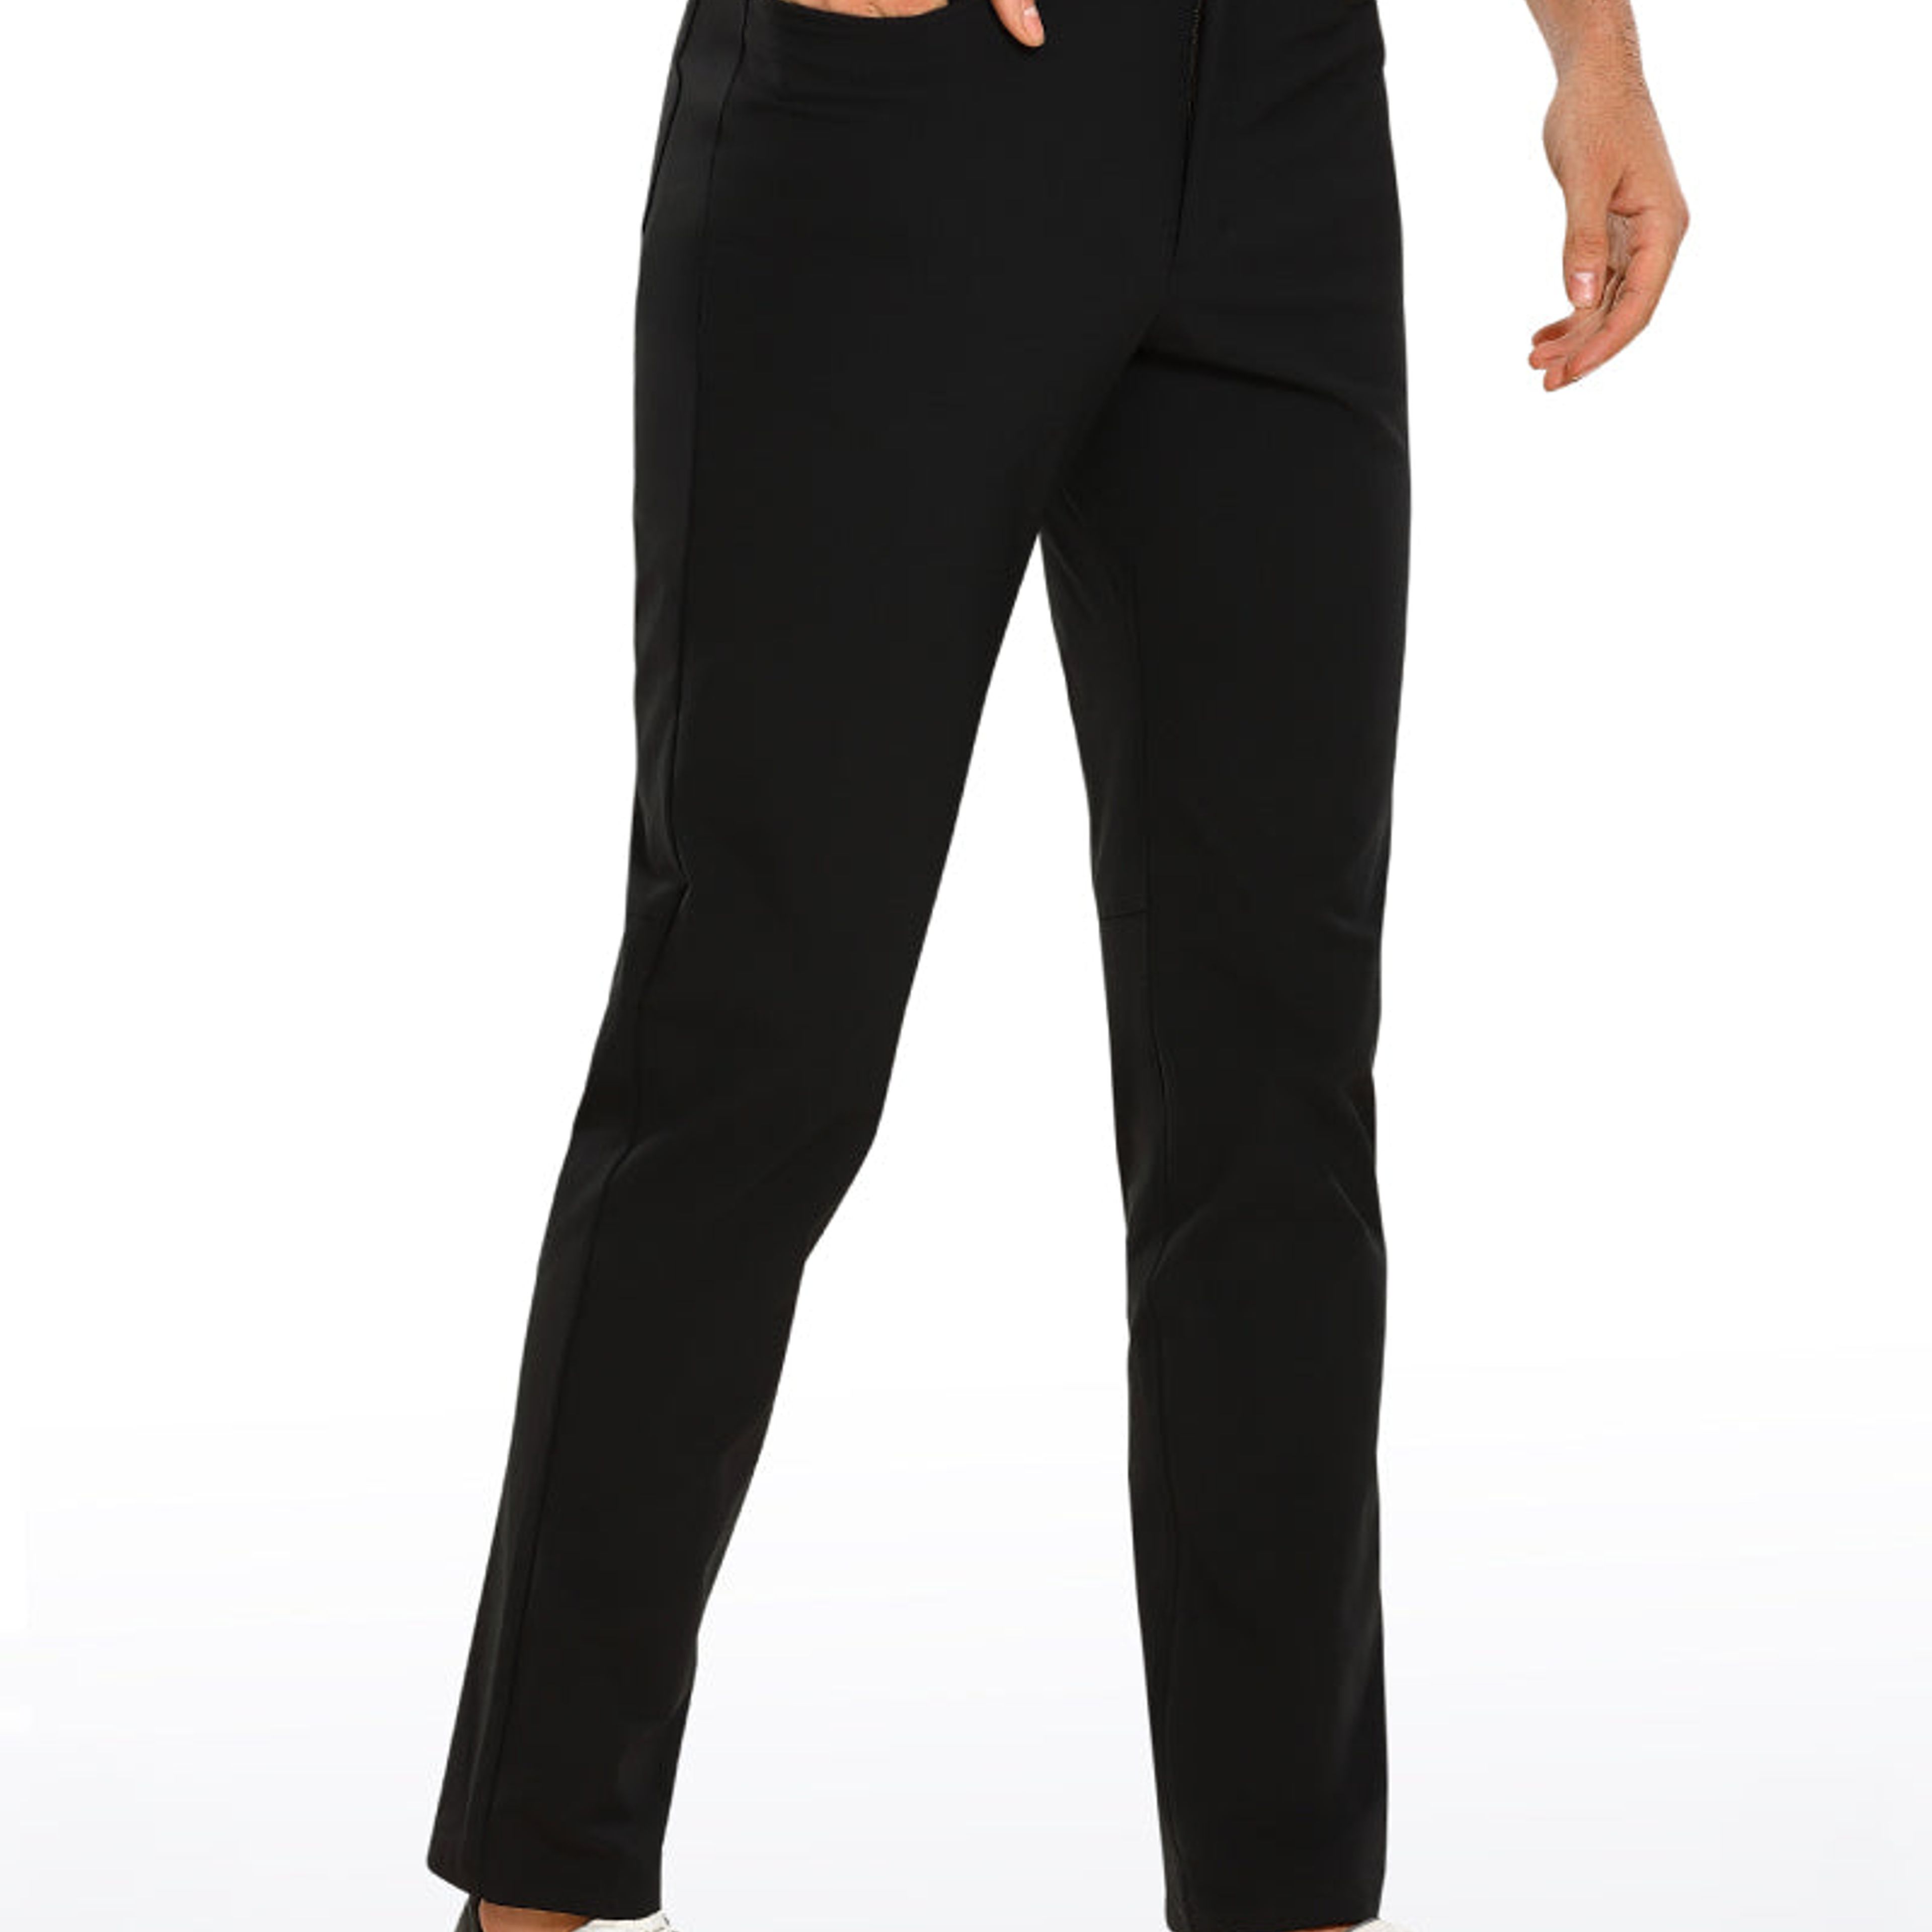 Crz Yoga All-Day Comfy Classic-Fit Golf Pants 34'' on Marmalade